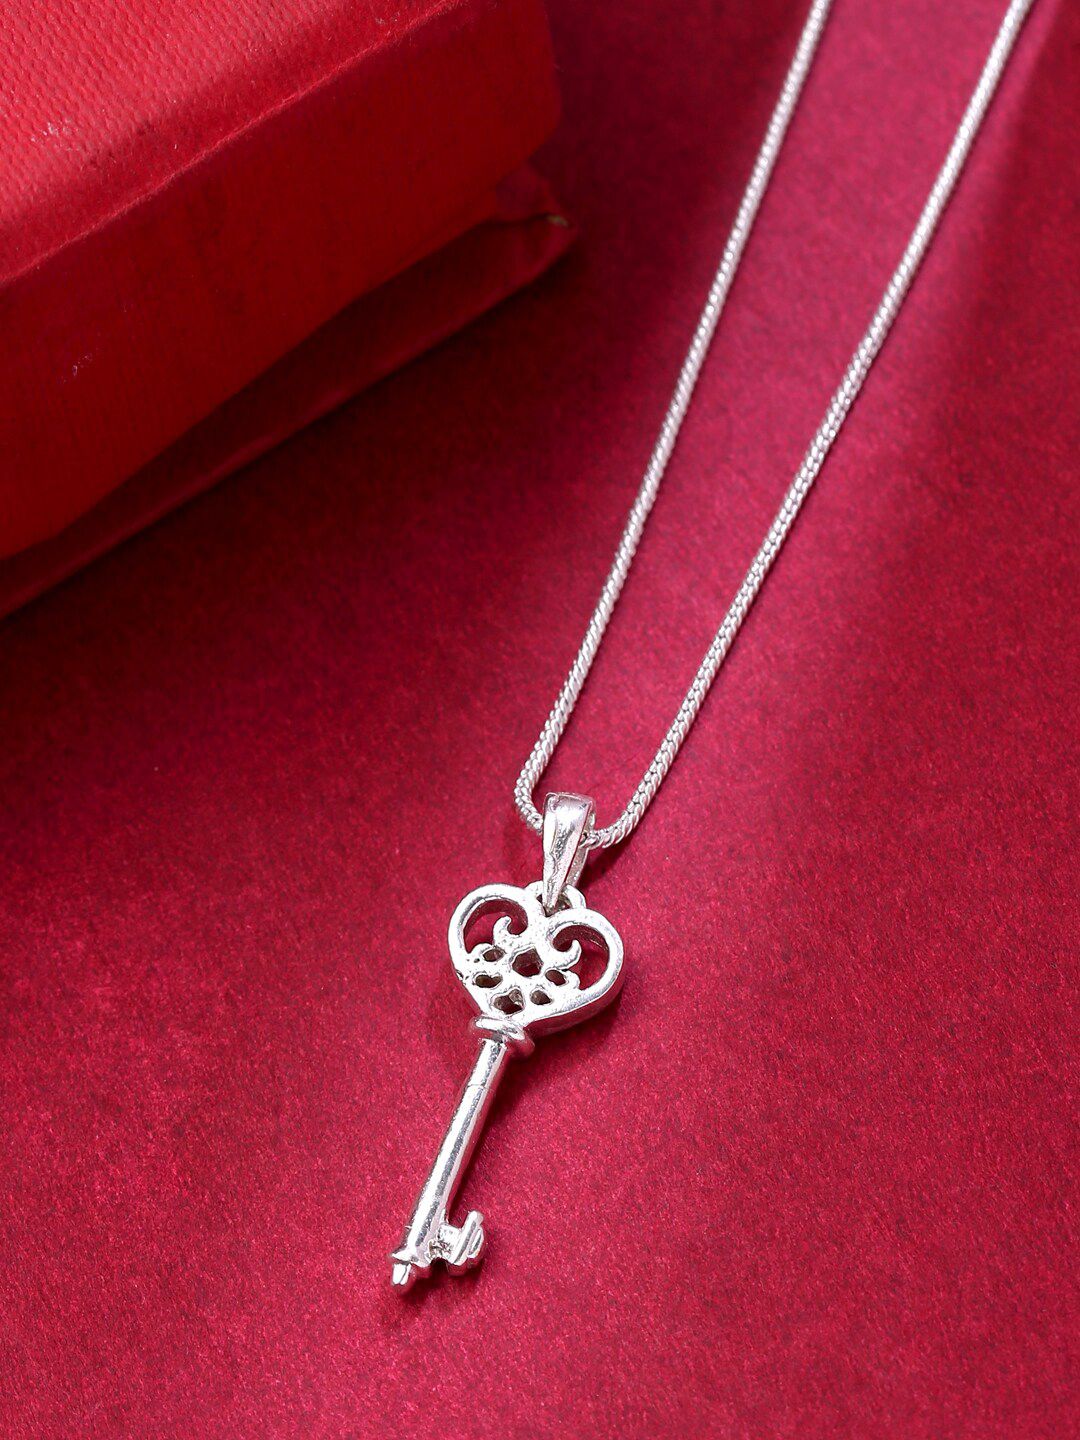 VIRAASI Silver-Toned Brass Heart Key Pendant Necklace Price in India